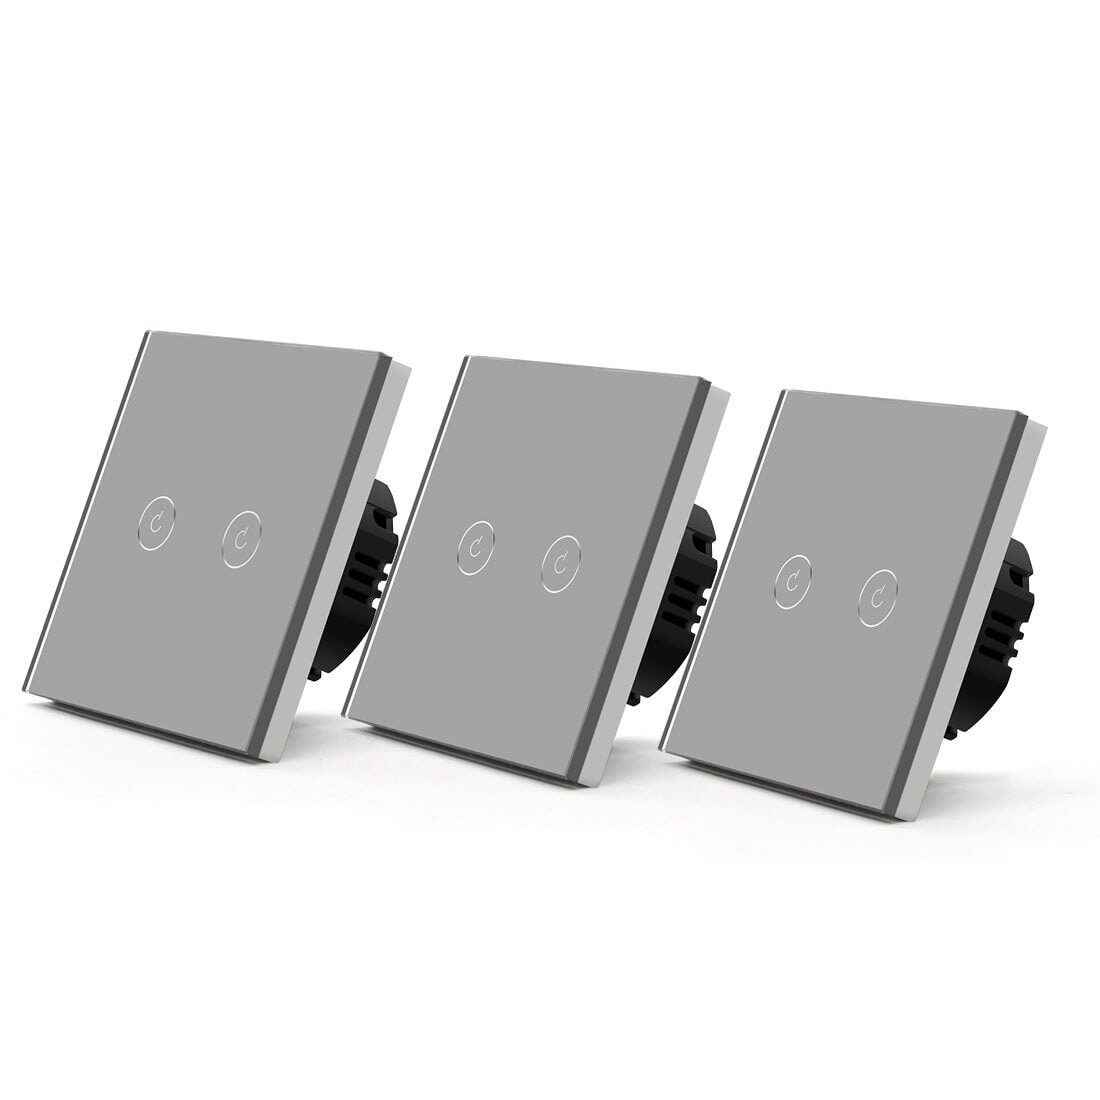 Bseed Smart Wifi Touch Switch 2 Gang 1/2/3 Way 1/2/3 Pcs/Pack Wall Plates & Covers Bseedswitch Grey 3Pcs/Pack 